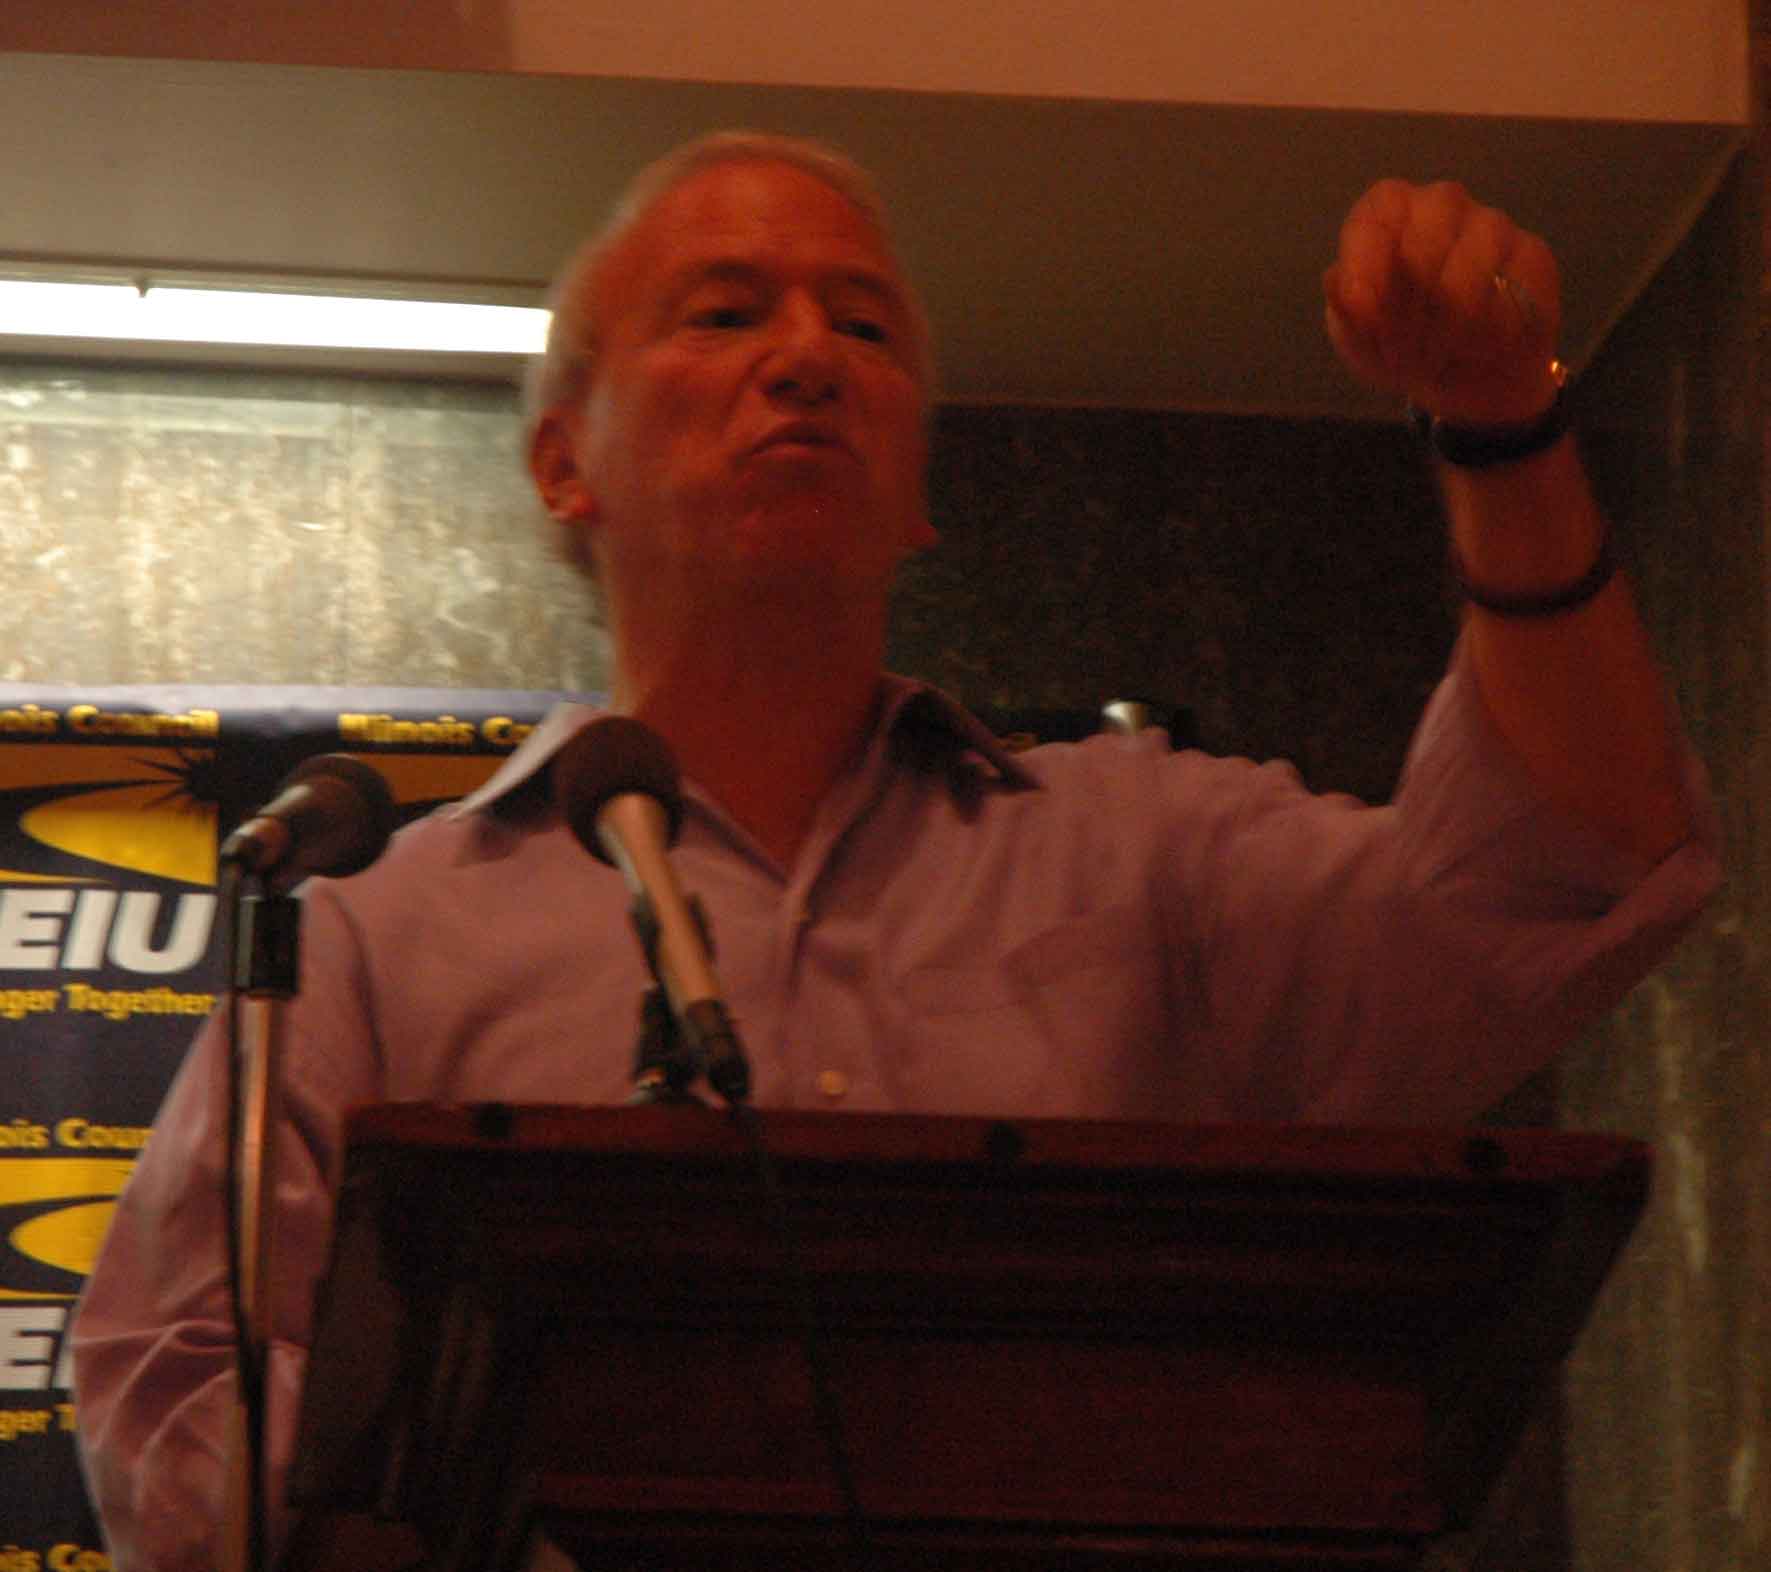 SEIU International President Andy Stern spoke to SEIU organizers and staff on October 10, 2006, at Chicago’s UNITE HERE union hall on Ashland Ave. At the time, Stern was in Chicago promoting his book. Since Stern’s Chicago visit, tensions between SEIU and other unions, on the one hand, and within SEIU, on the other, have escalated, at times resulting in violence. Substance photo by George N. Schmidt. 